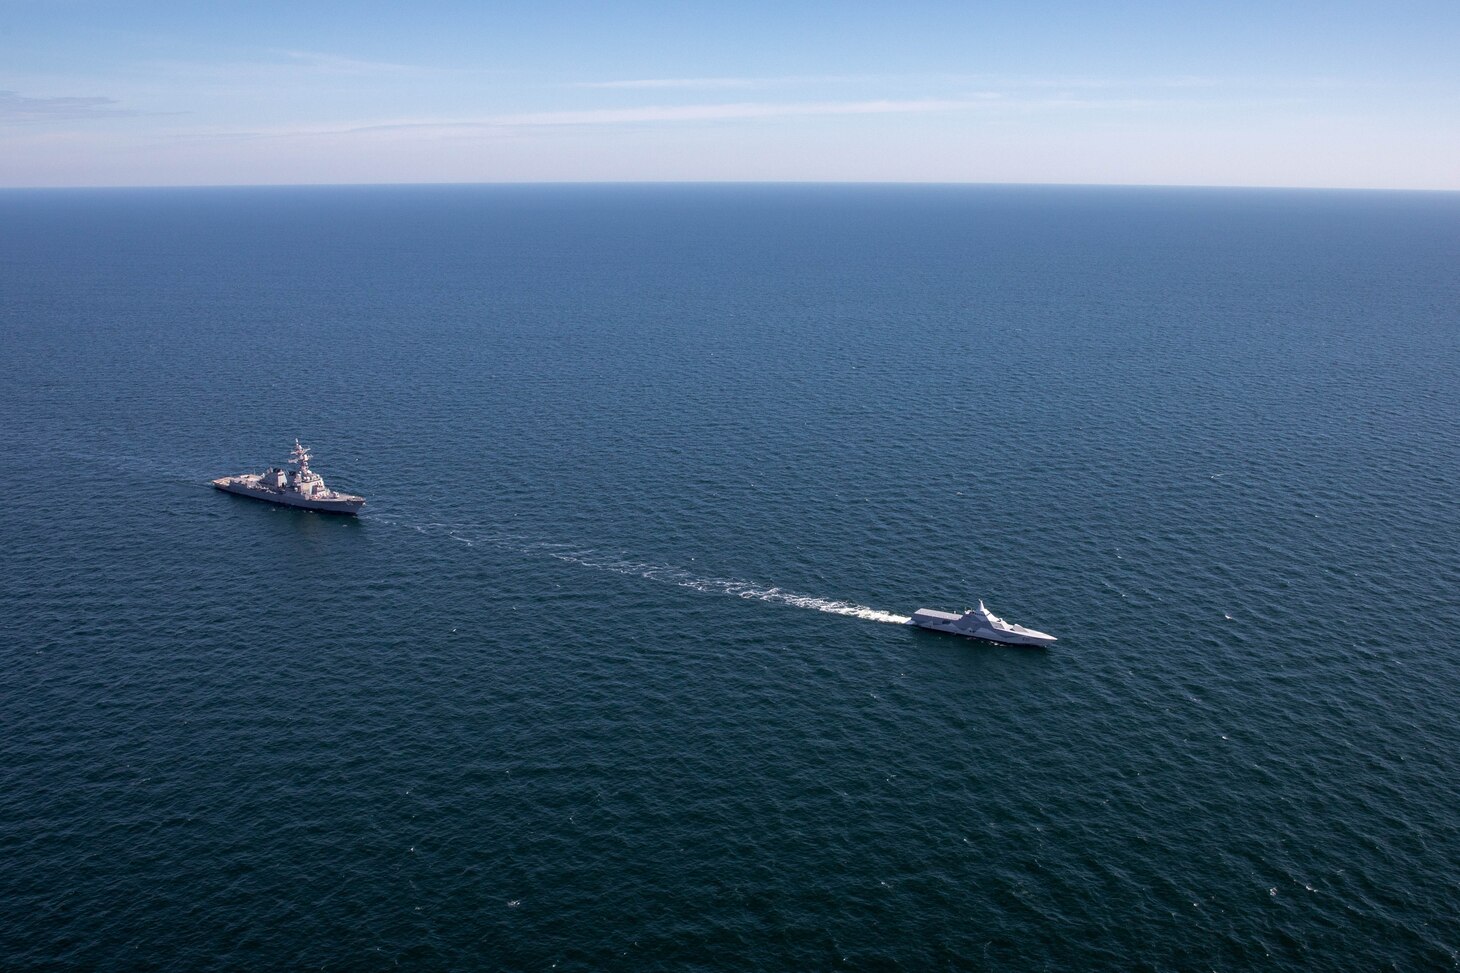 The Arleigh Burke-class guided-missile destroyer USS Roosevelt (DDG 80), left, and the Swedish Navy Visby-class corvette HSwMS Härnösand (K 33) steam in formation during Neptune Strike 23-2, in the Baltic Sea, July 12, 2023. Roosevelt is participating in Neptune Strike 23-2, a multiyear effort focused on the integration of U.S. and NATO allied and partner international force to provide assurance, deterrence, and collective defense for the Alliance and STRIKFORNATO. (U.S. Navy photo by Mass Communication Specialist 2nd Class Elexia Morelos)